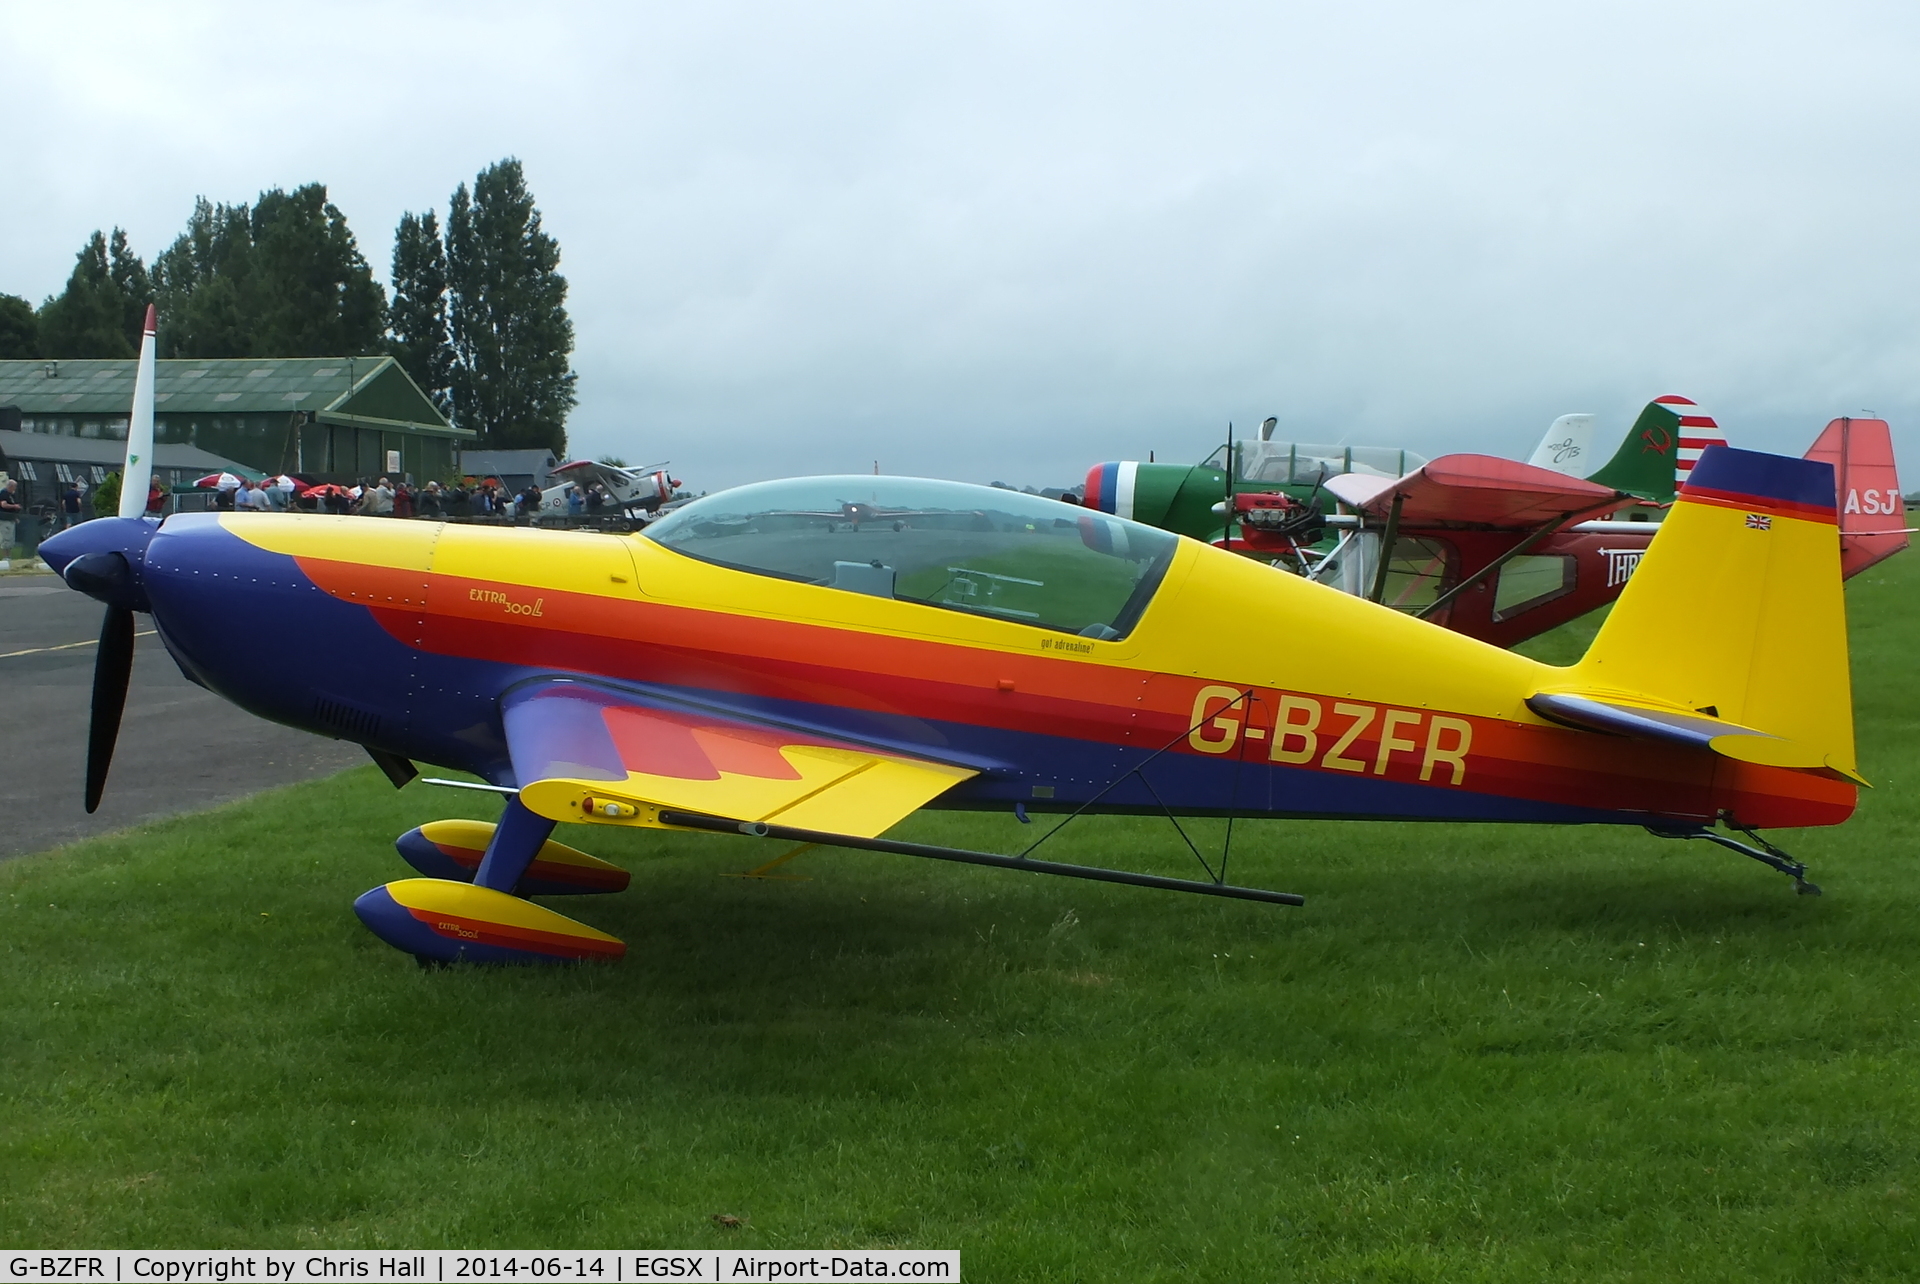 G-BZFR, 2000 Extra EA-300L C/N 203, at the Air Britain fly in